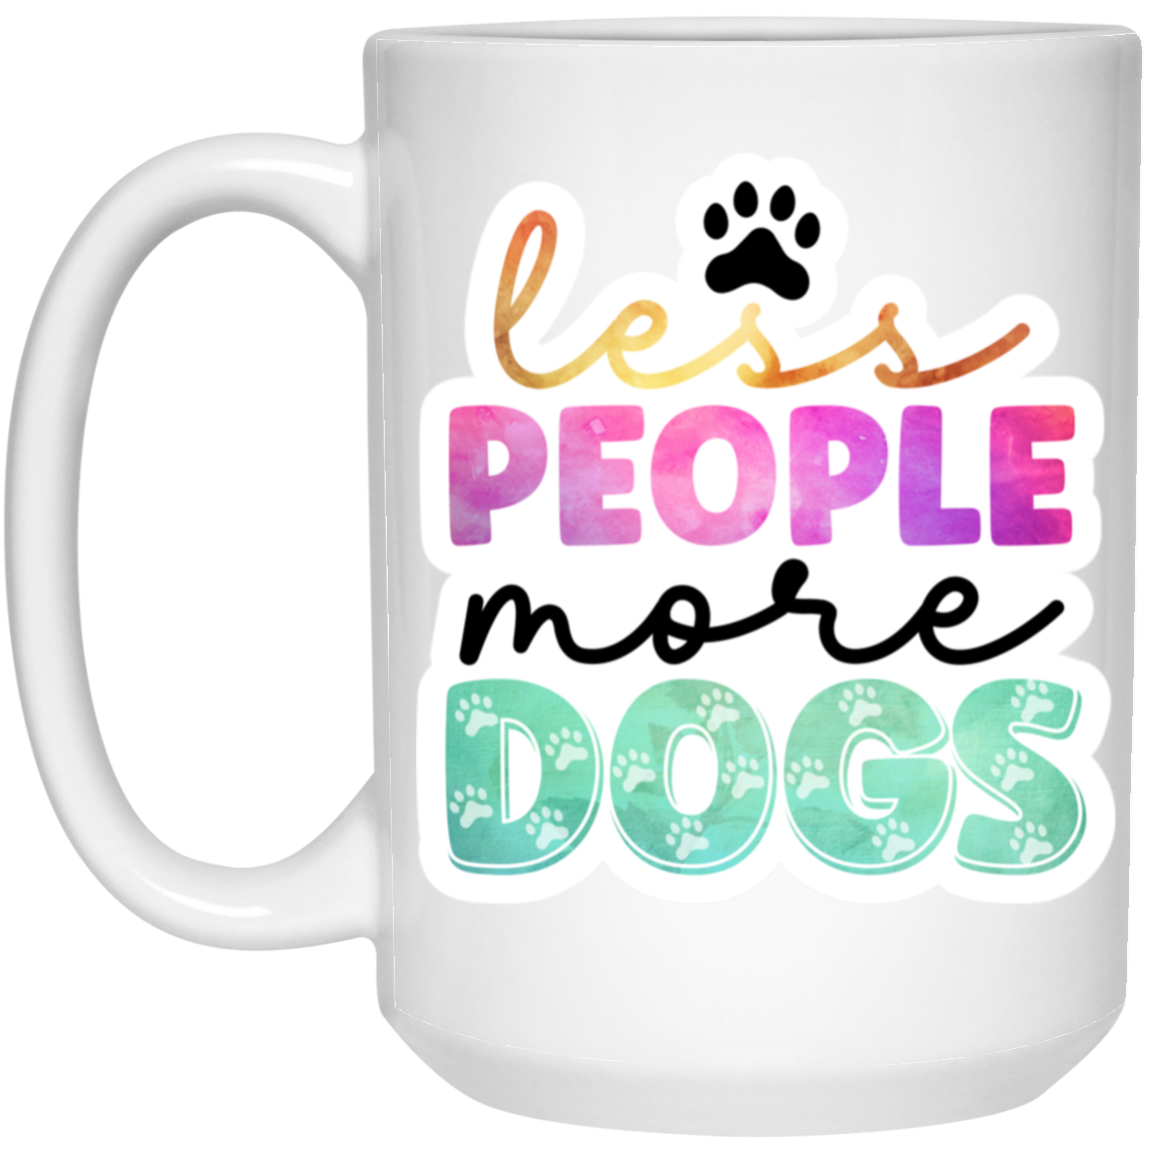 Less People More Dogs Watercolor 15 oz. White Mug